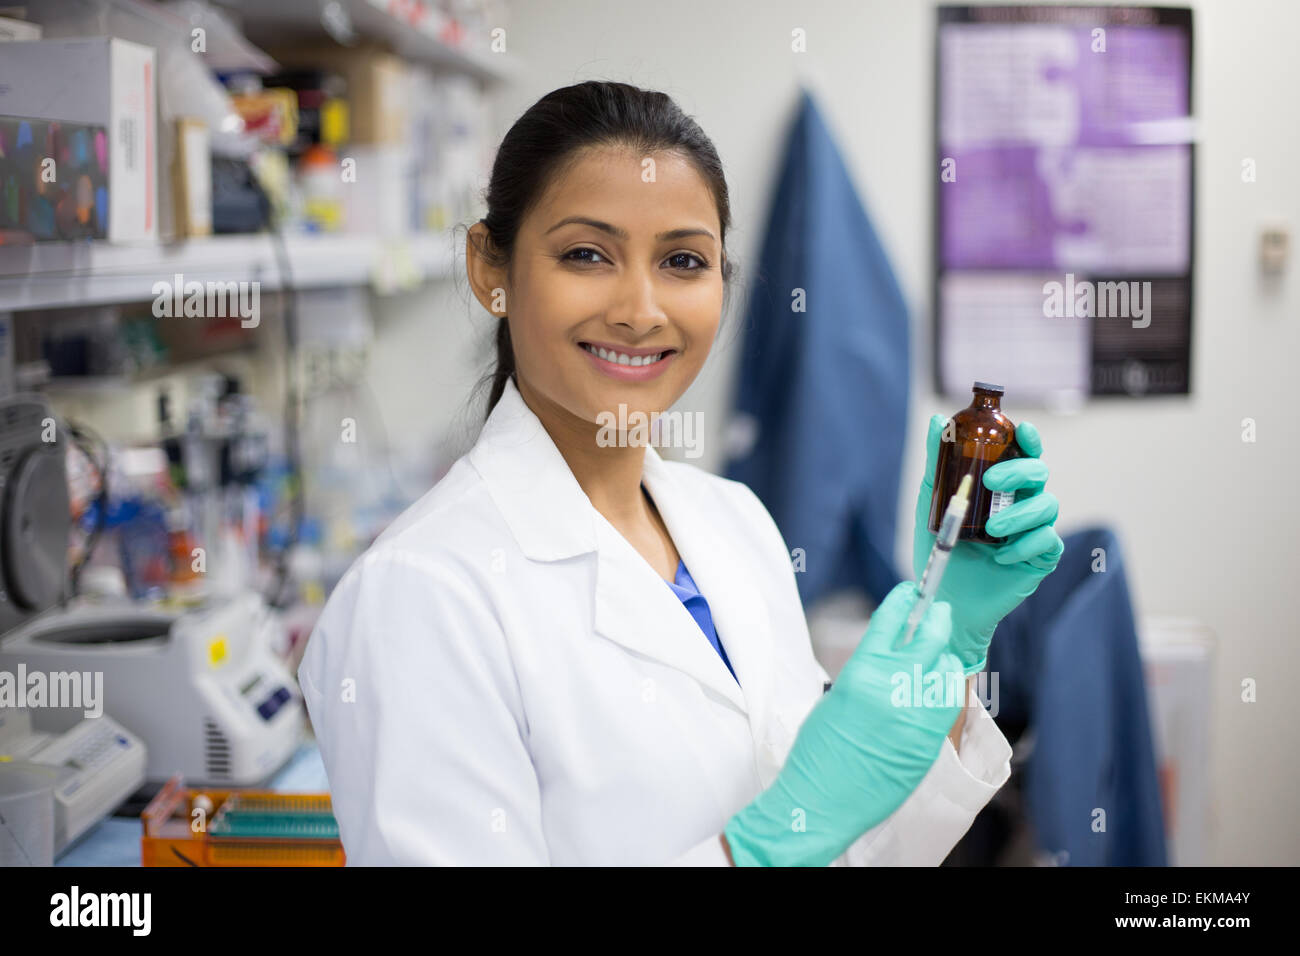 Closeup portrait, smart woman scientist in white labcoat holding syringe needle and brown bottle in isolated lab background Stock Photo